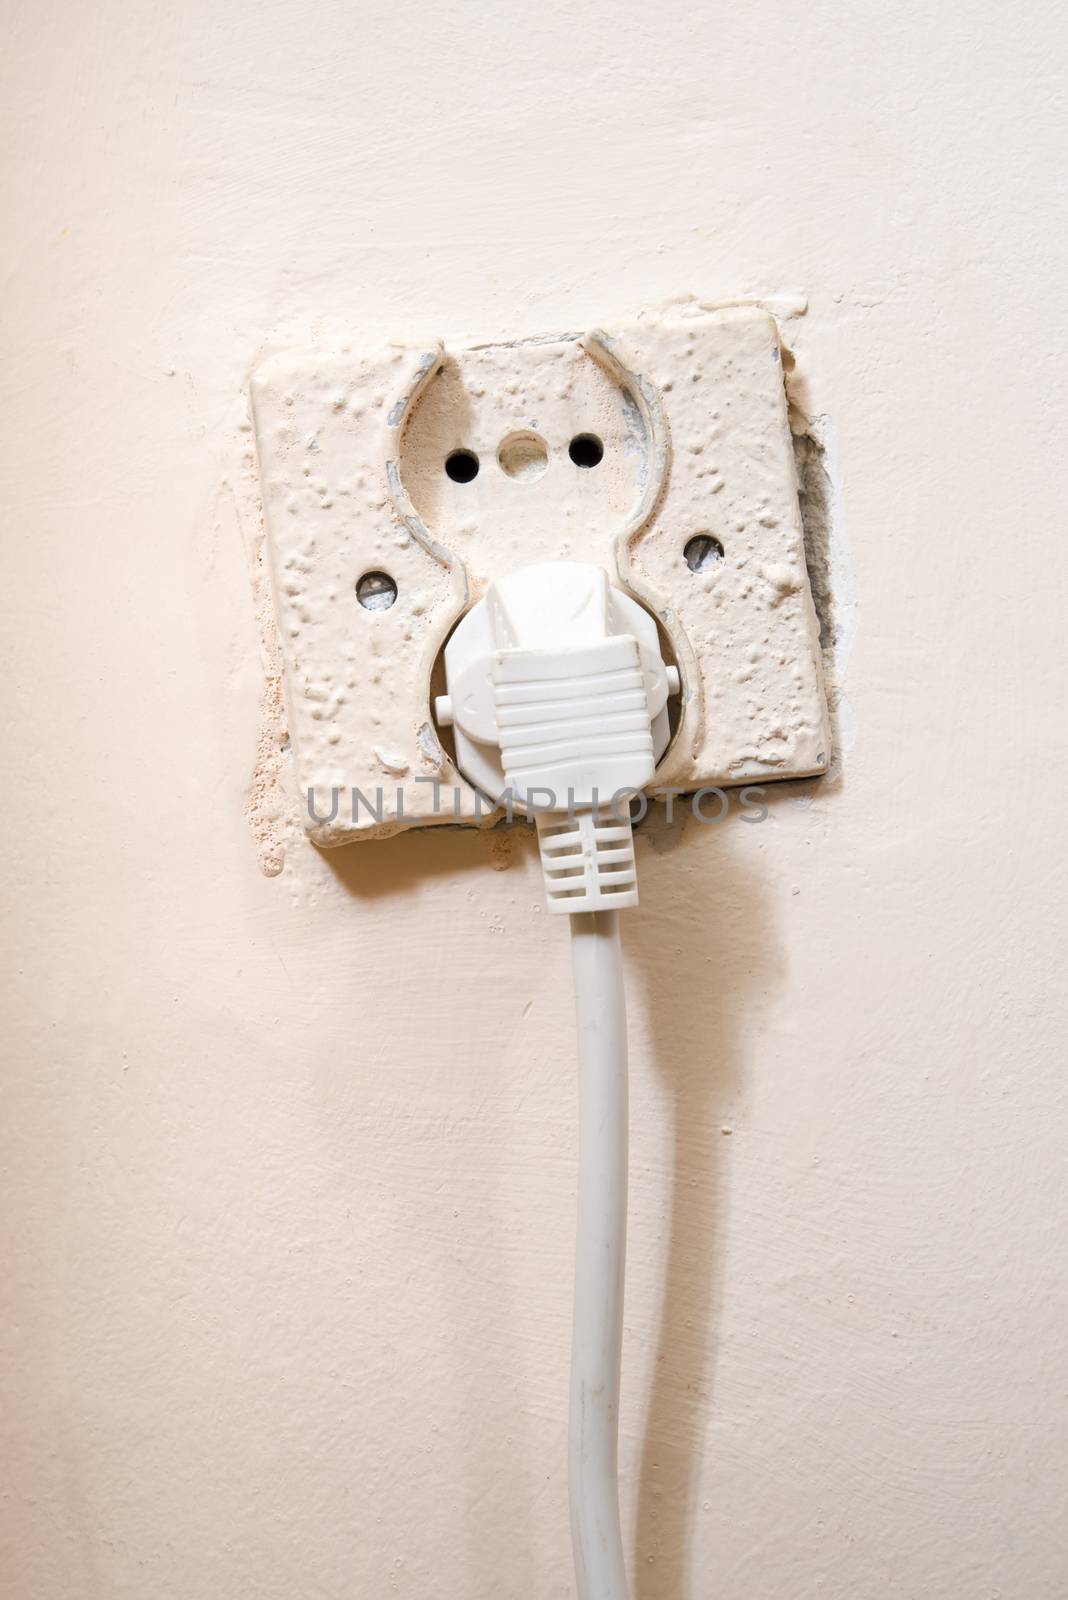 Old power socket with electric cable plug